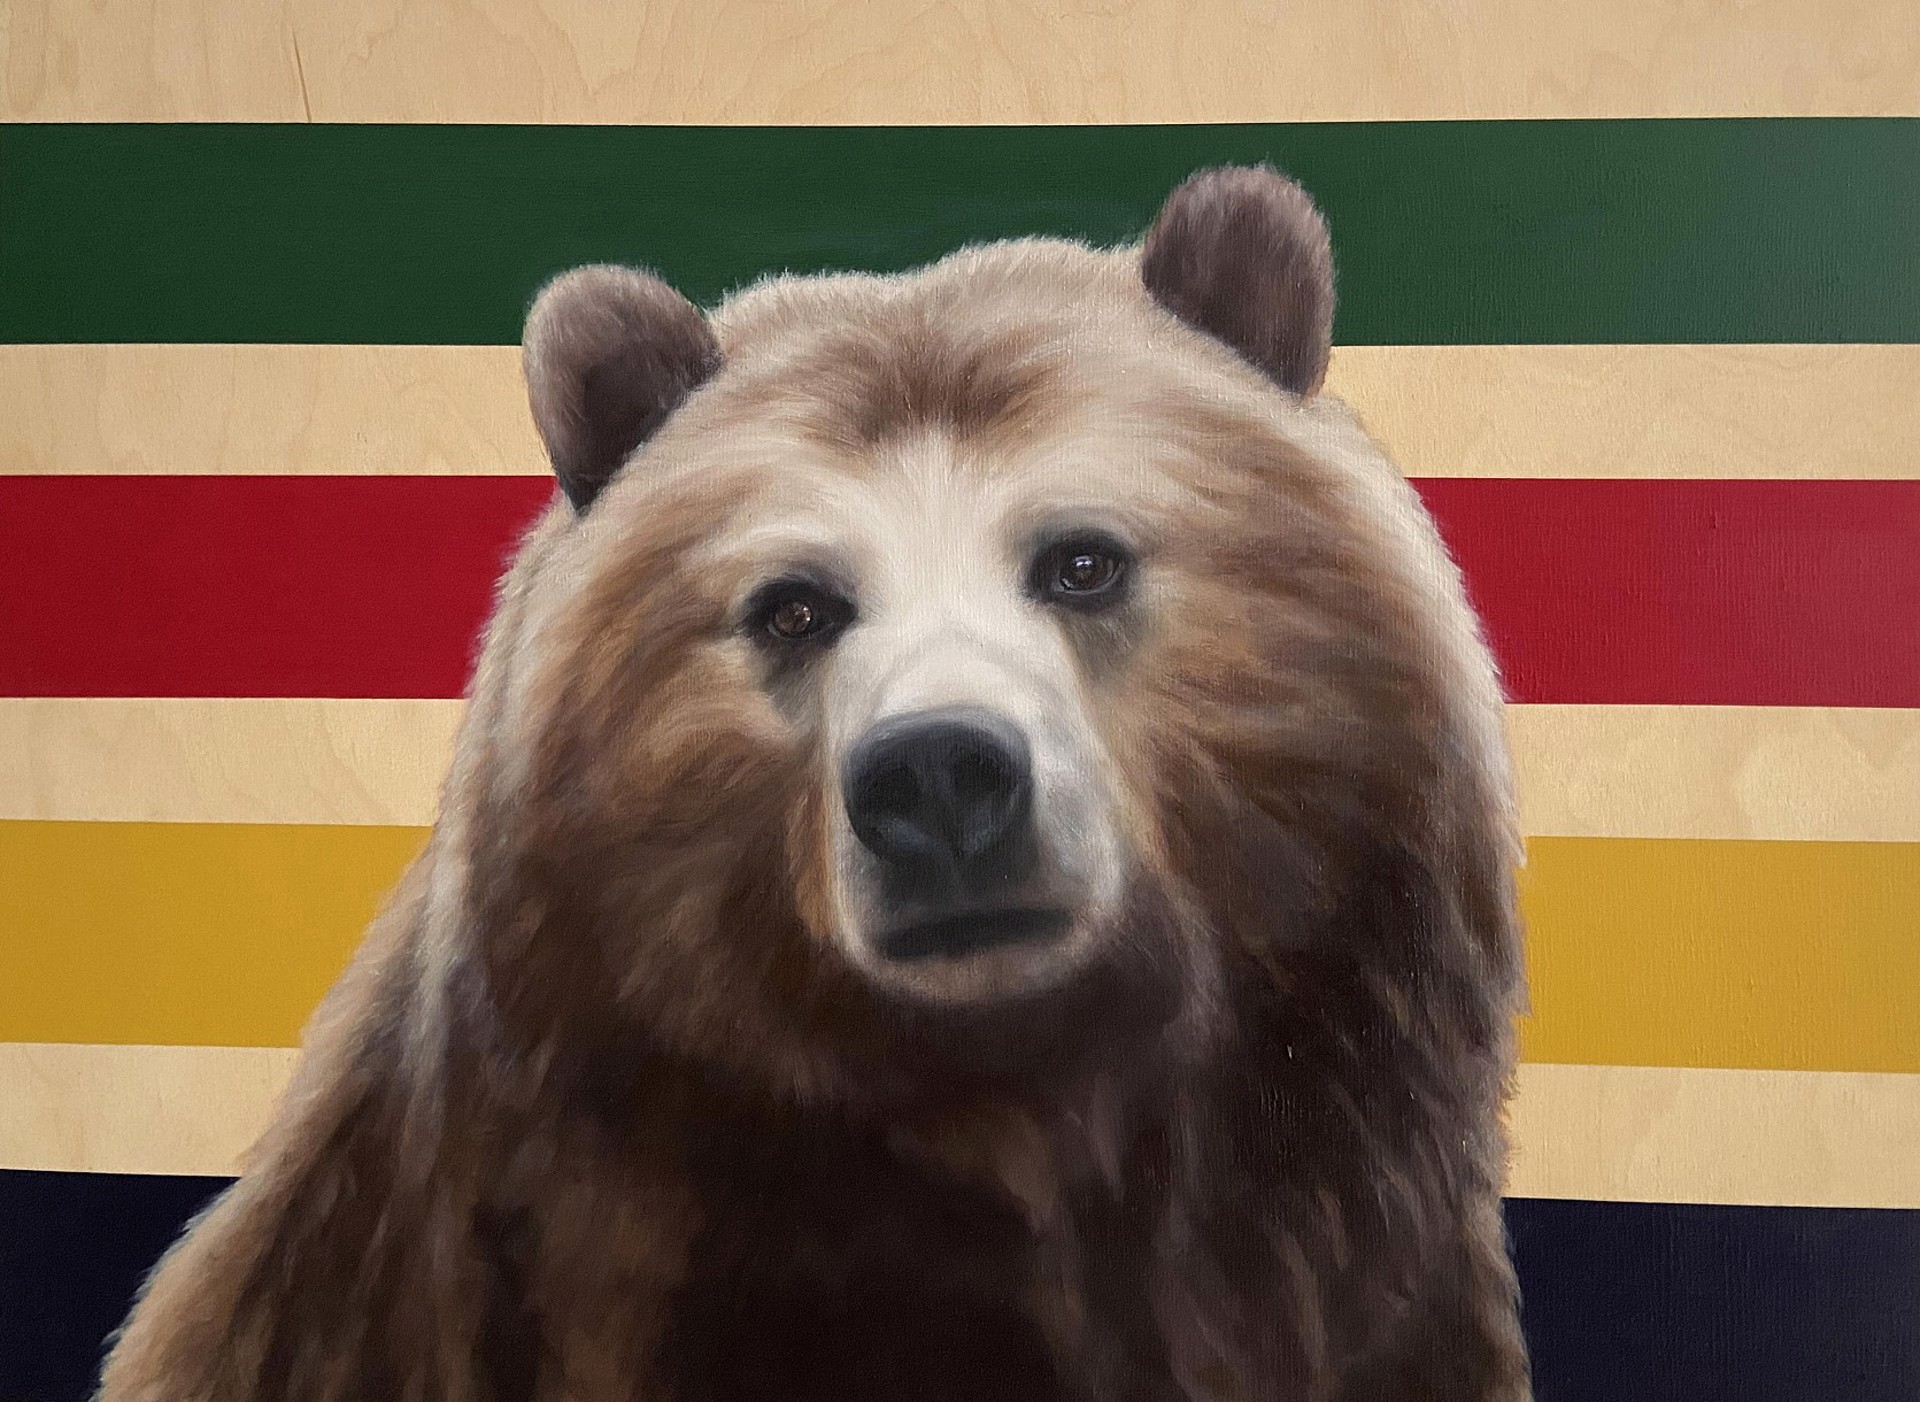 Our HBC Brown Bear by Gretta Gibney